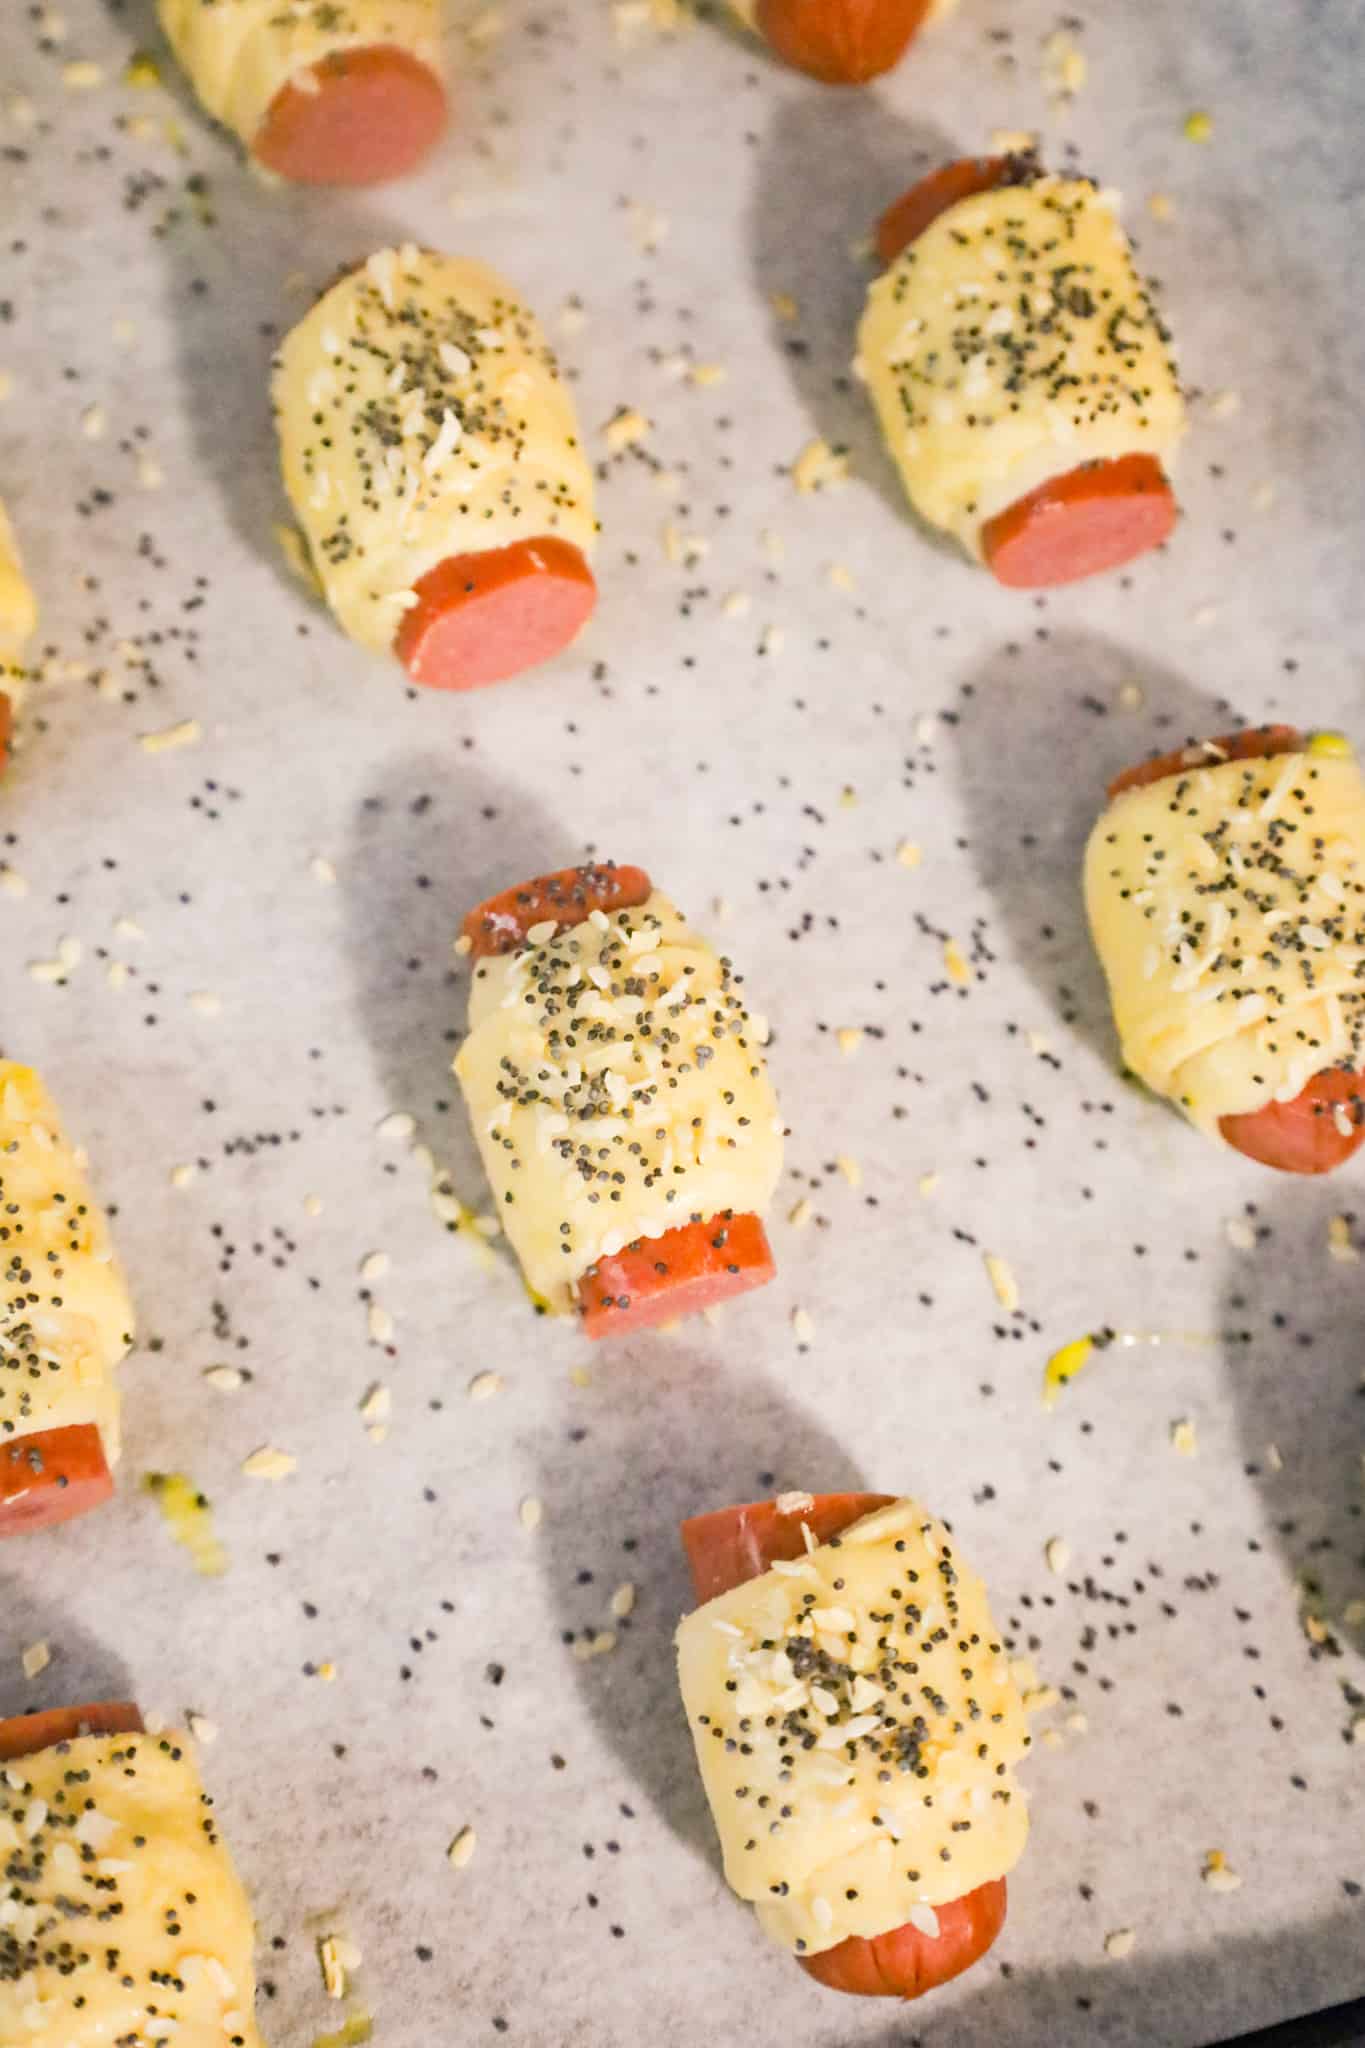 poppy seeds and sesame seeds on top of crescent wrapped hot dog pieces on a parchment lined baking sheet